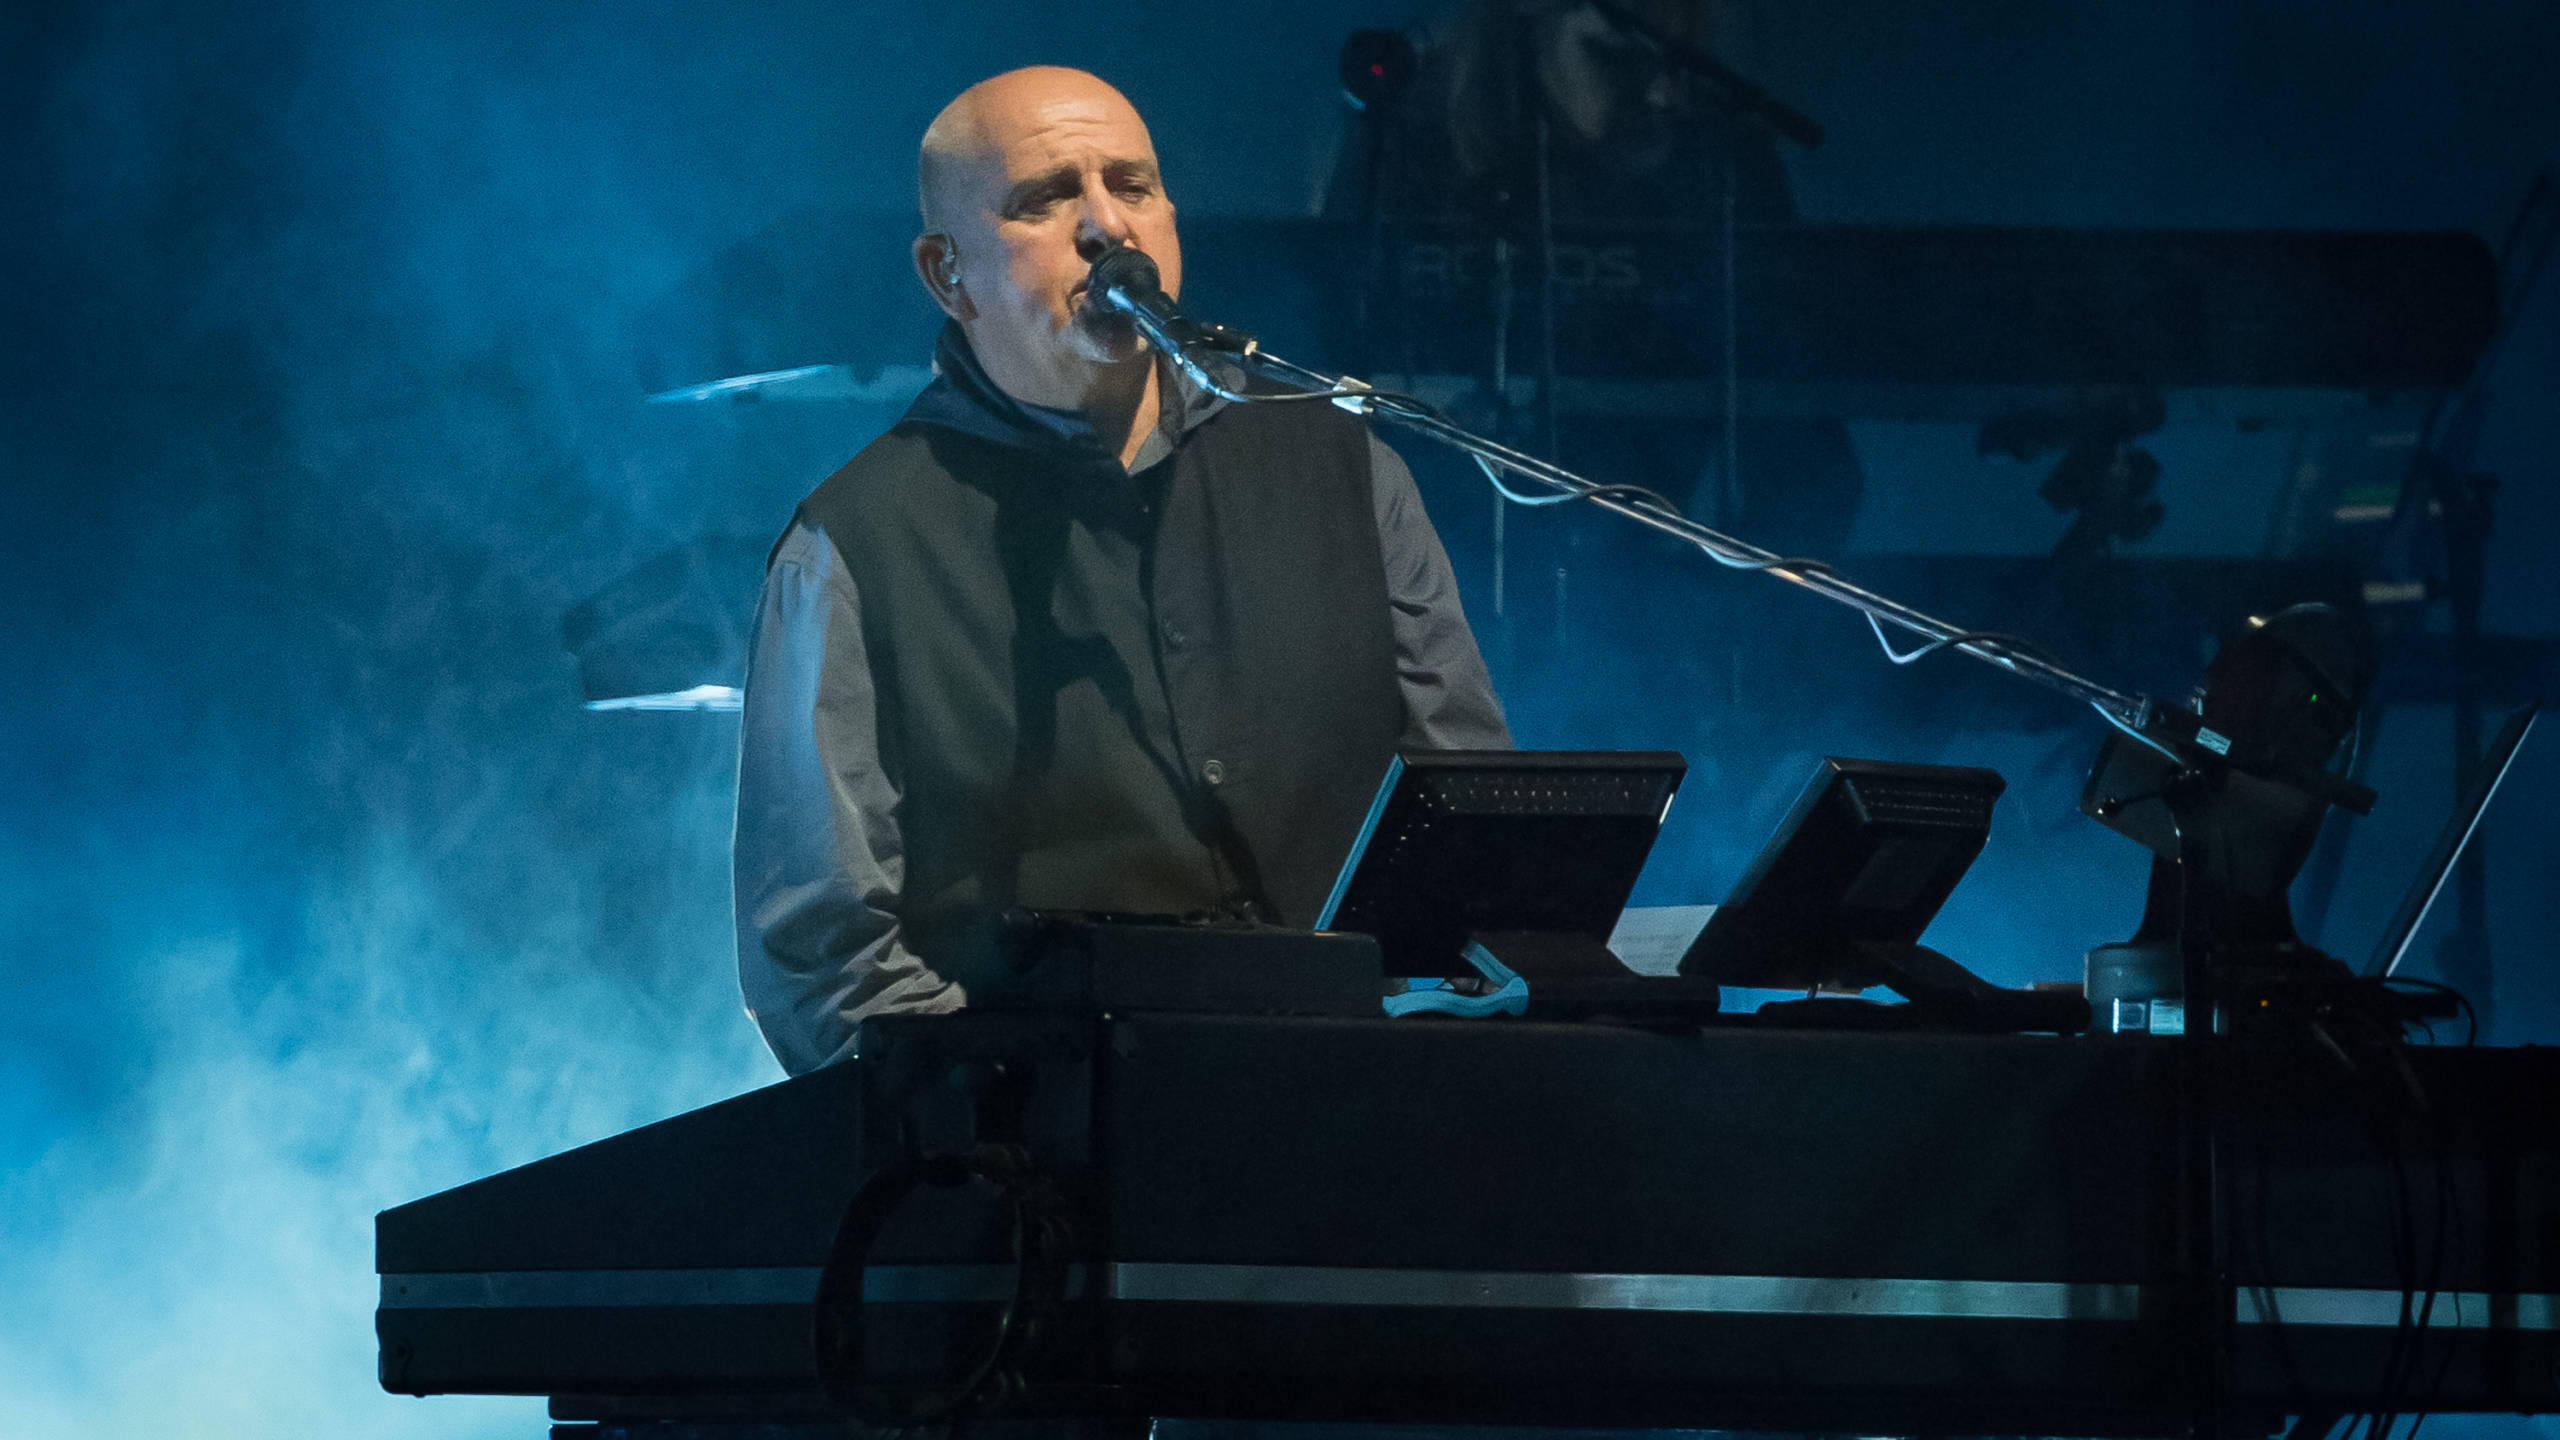 Peter Gabriel performs on stage during the "Rock, Paper, Scissors" North American Tour at Madison Square Garden